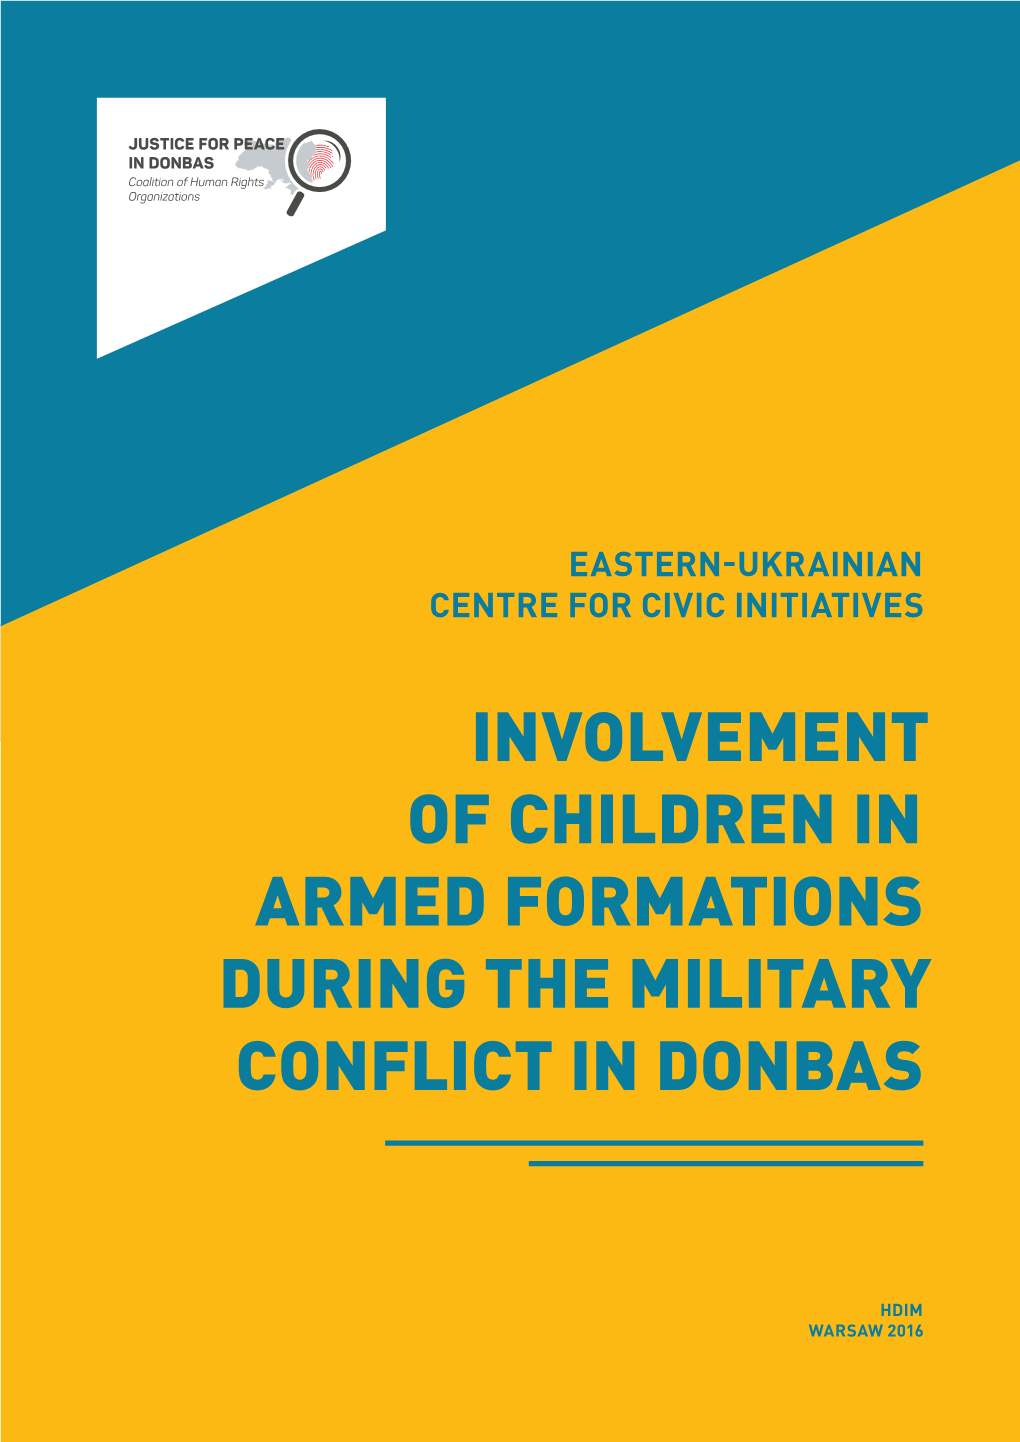 Involvement of Children in Armed Formations During the Military Conflict in Donbas